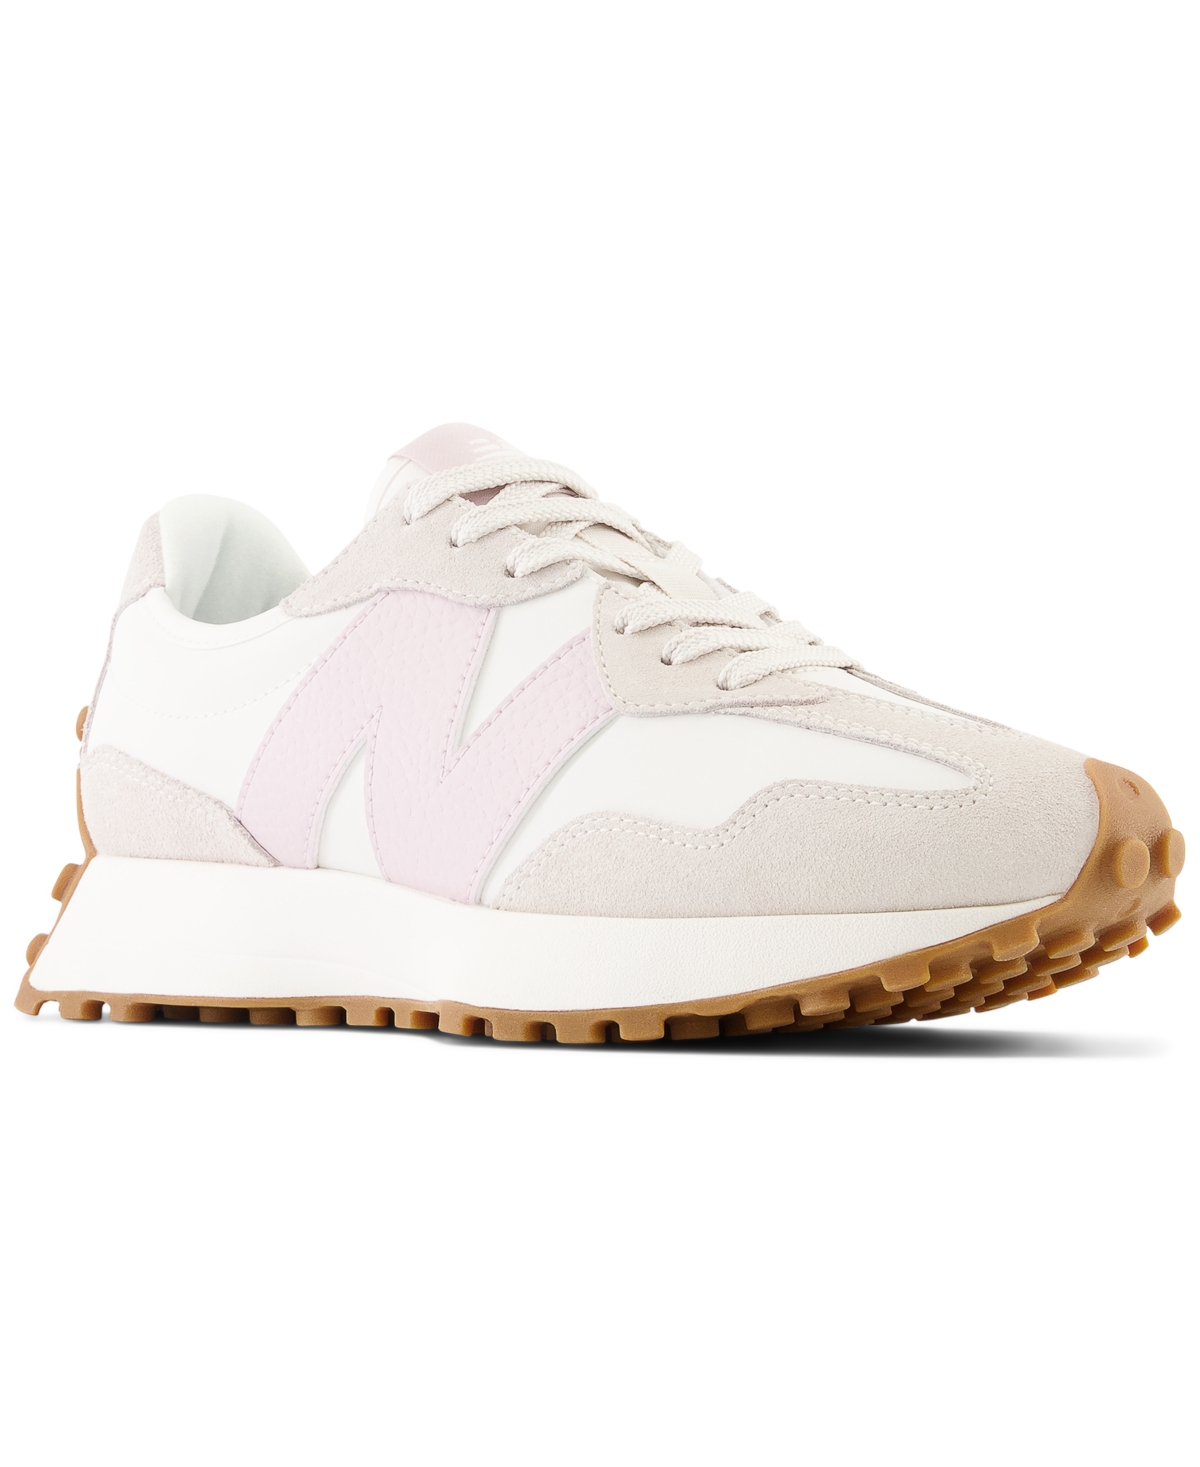 New Balance Women's 327 Solstice Casual Sneakers From Finish Line In December Solstice